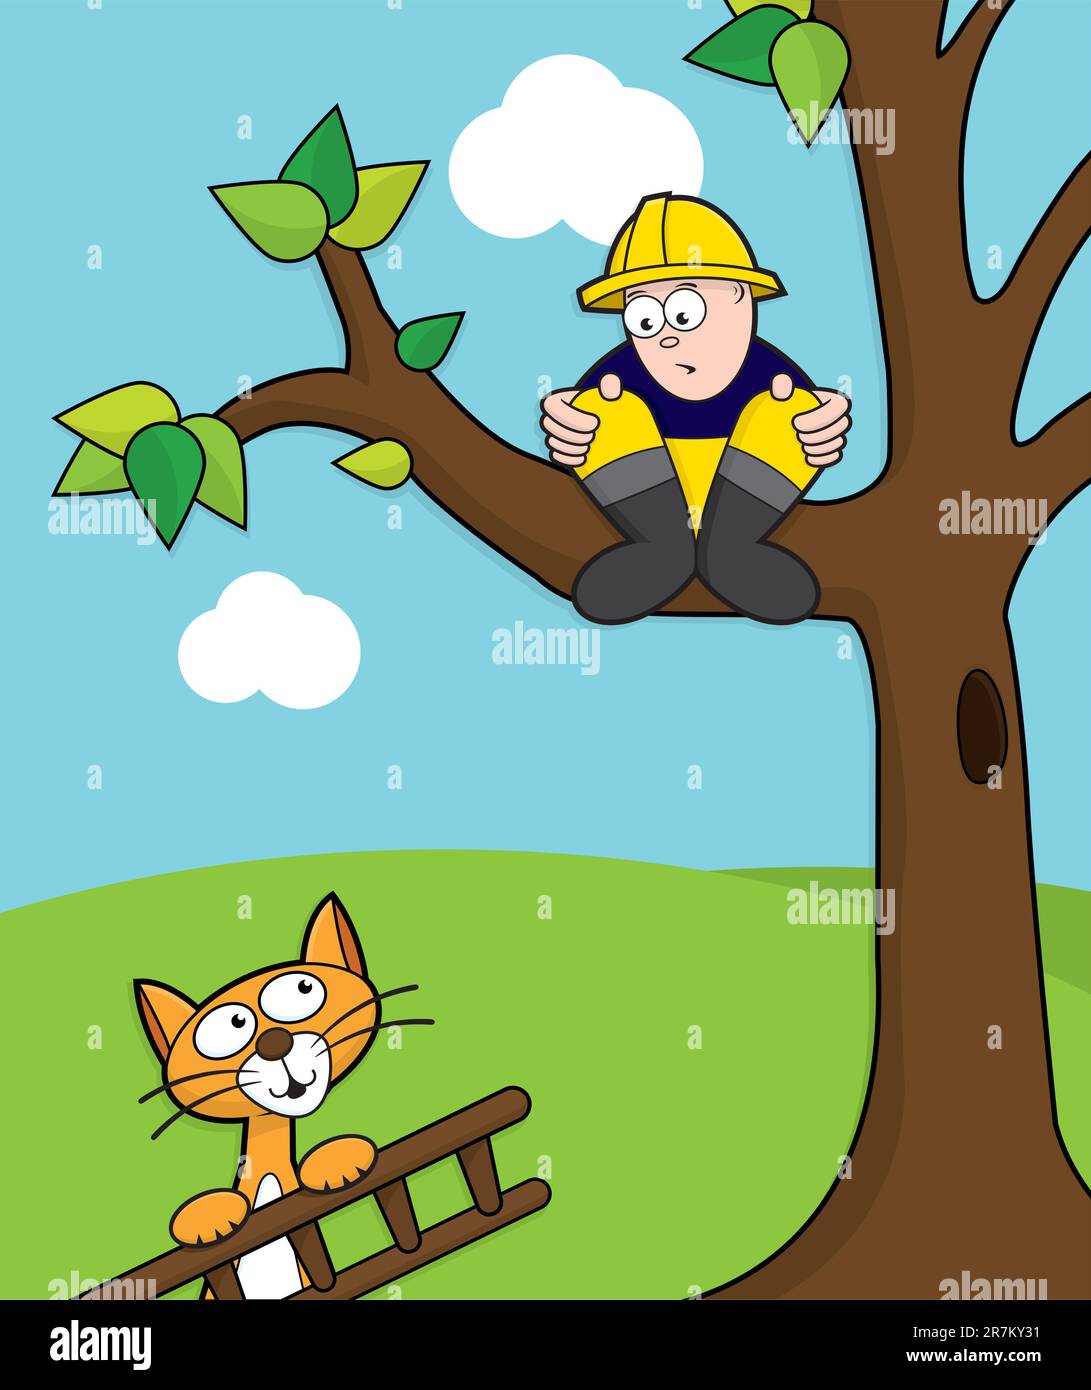 Cat coming to rescue a fireman stuck up a tree with ladder. Stock Vector